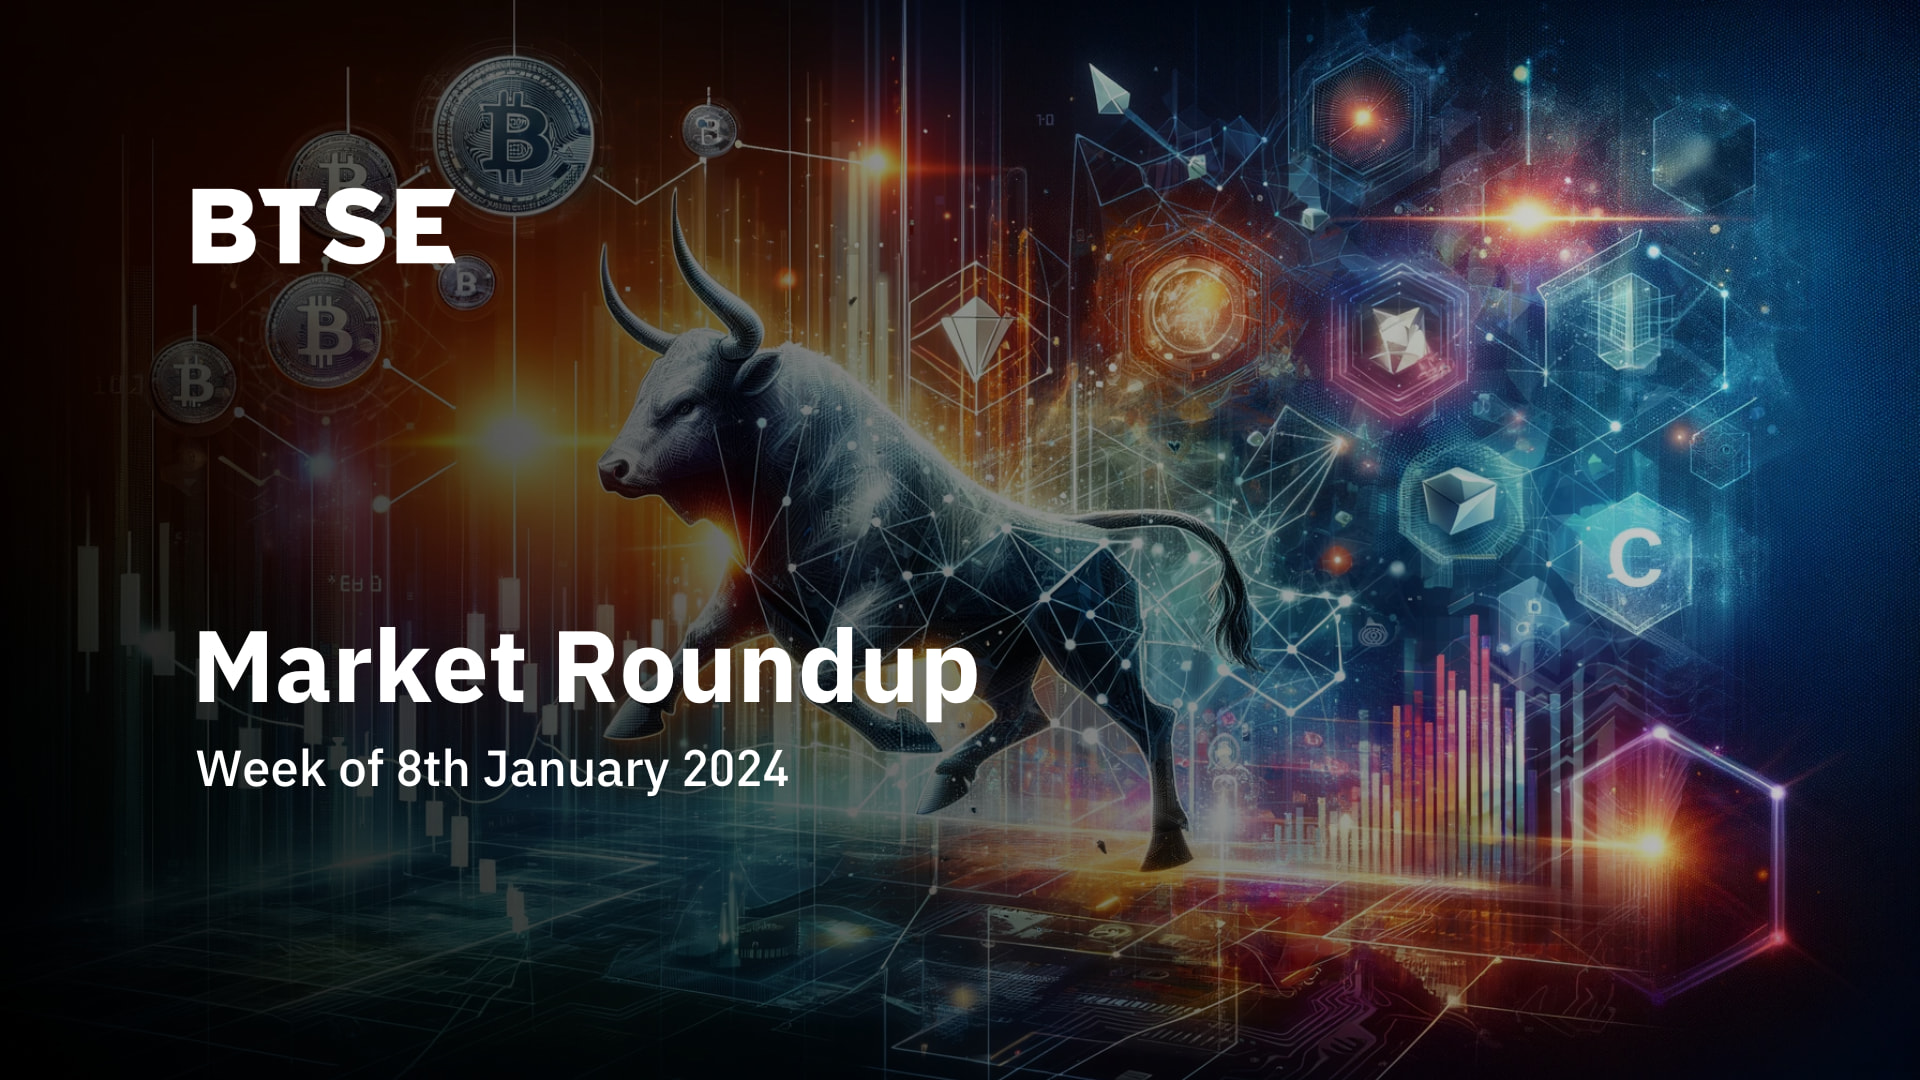 Market Roundup: Bitcoin's $1.5M Forecast, Record $4.5B ETF Volumes, and Circle Files for IPO